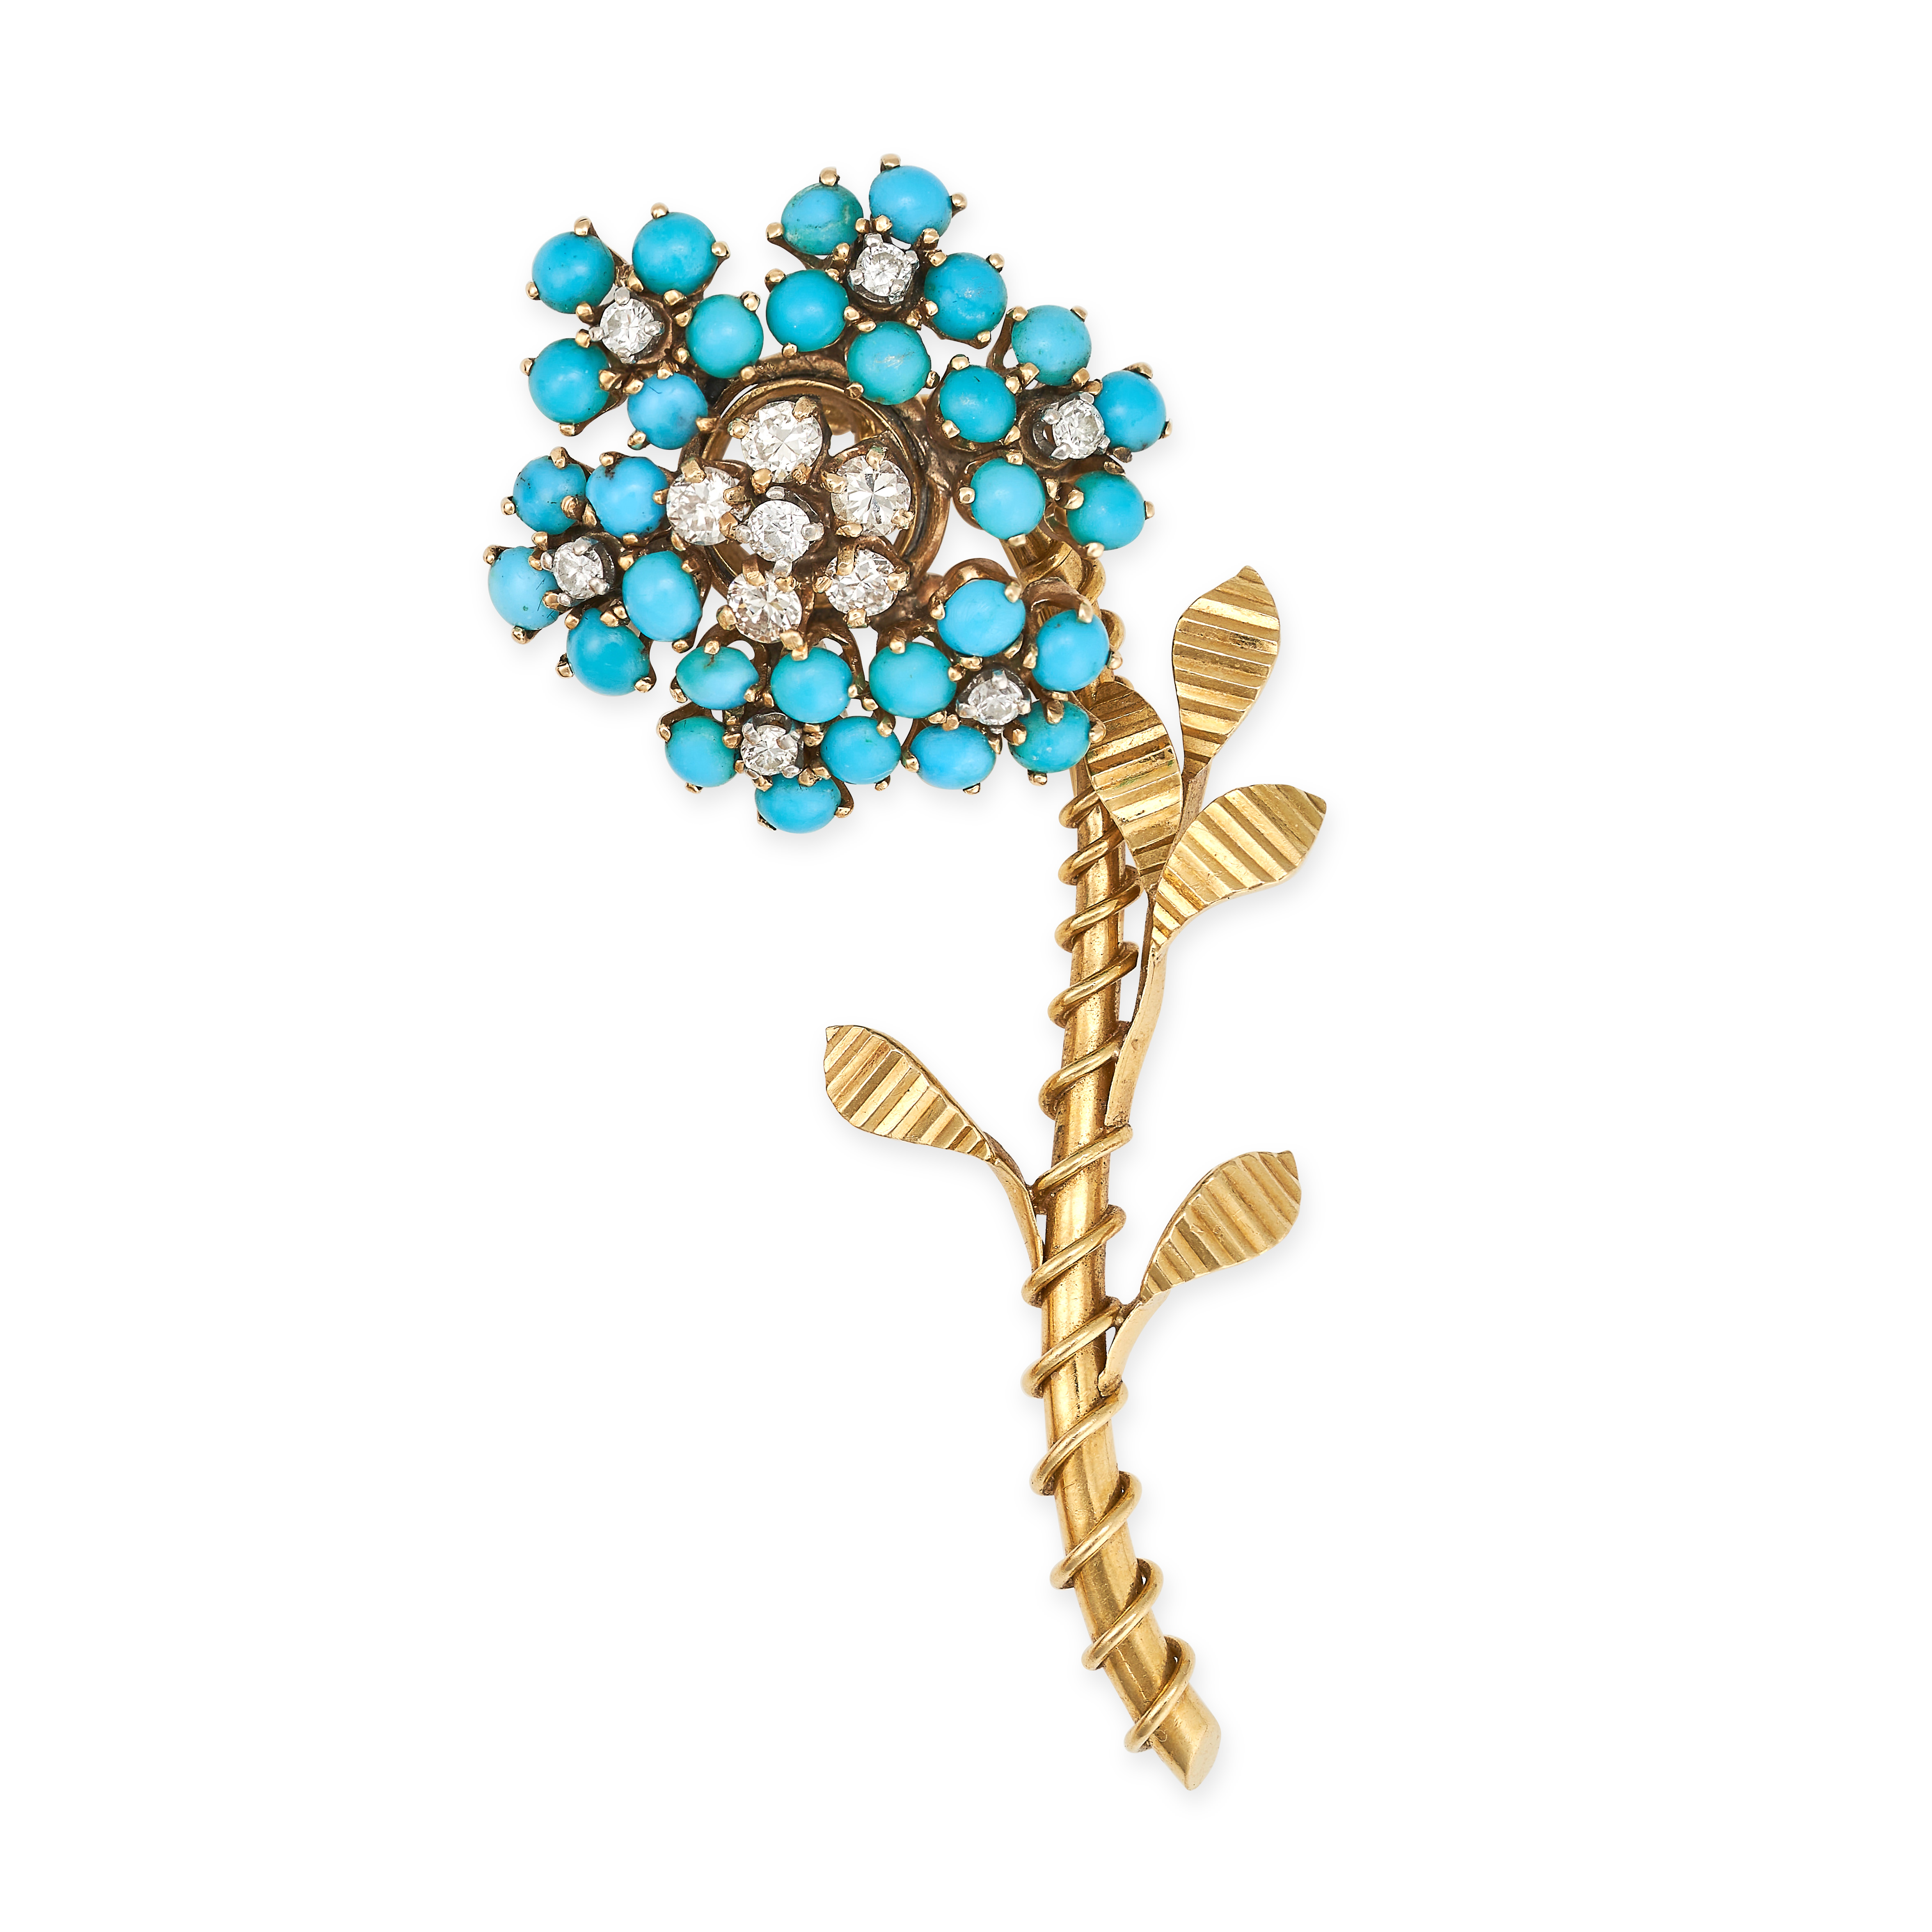 VAN CLEEF & ARPELS, A VINTAGE TURQUOISE AND DIAMOND FLOWER BROOCH in 14ct yellow gold, the head of